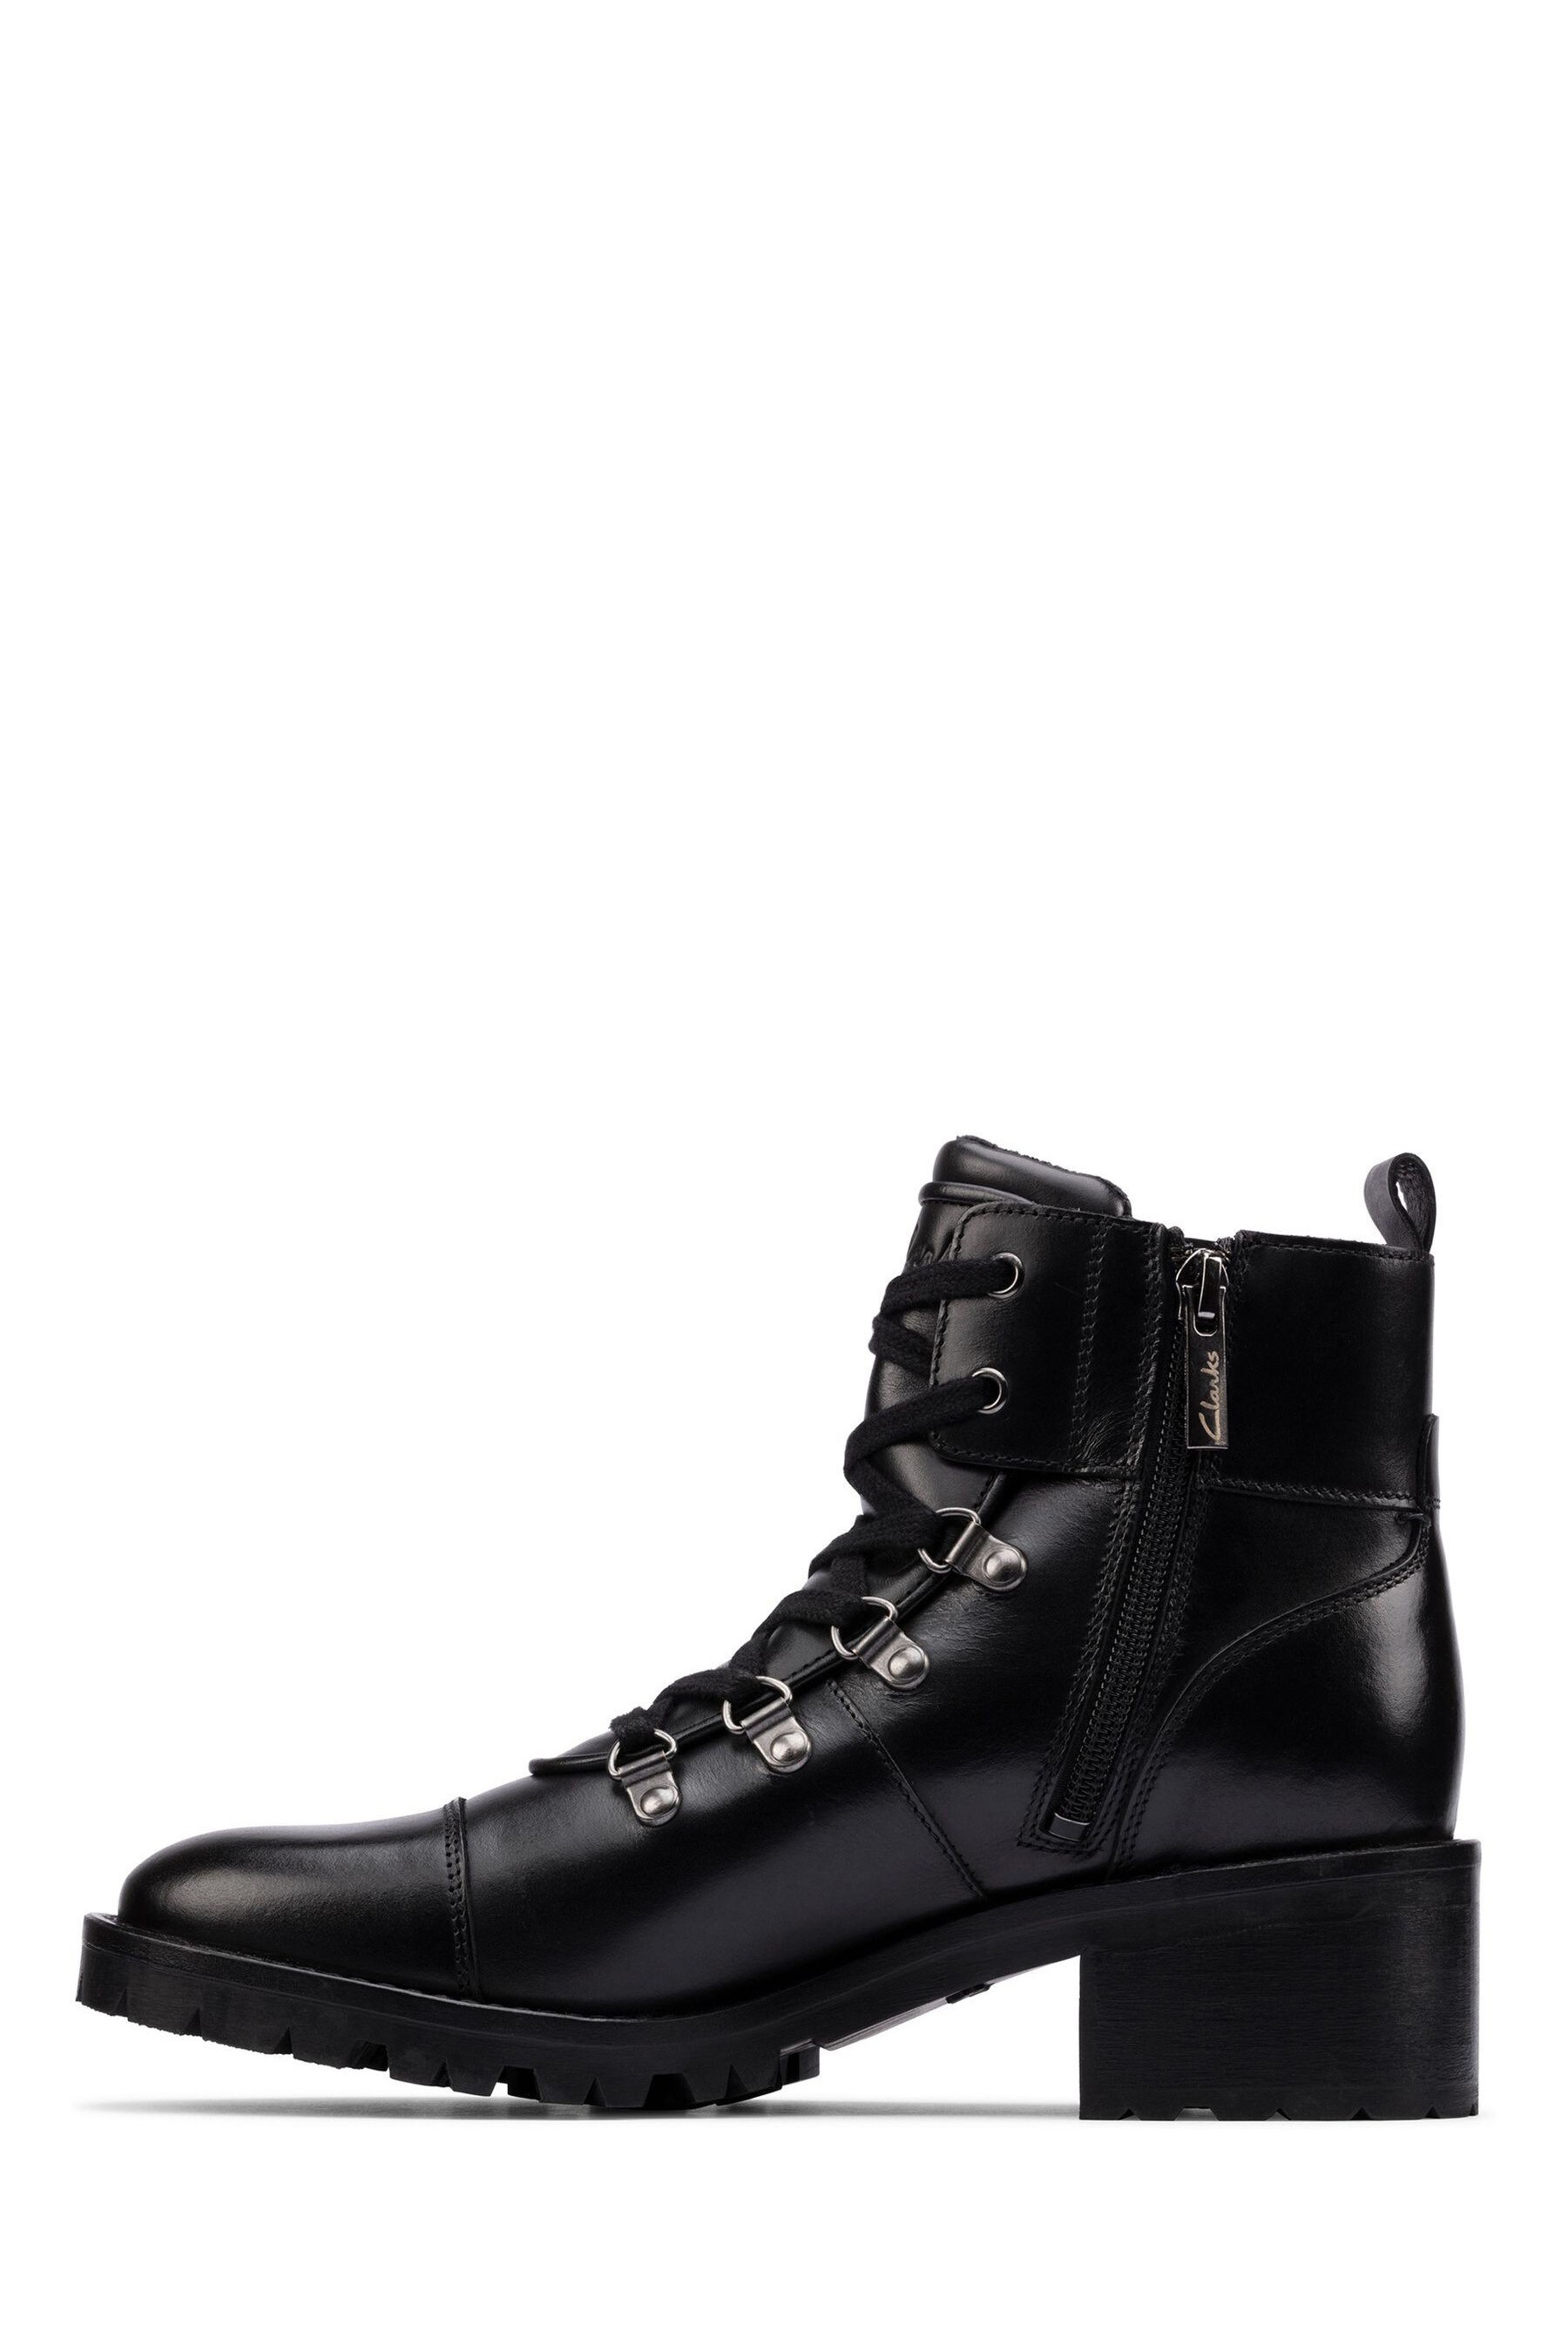 Buy Clarks Black Leather Roseleigh Sky Boots from Next Ireland